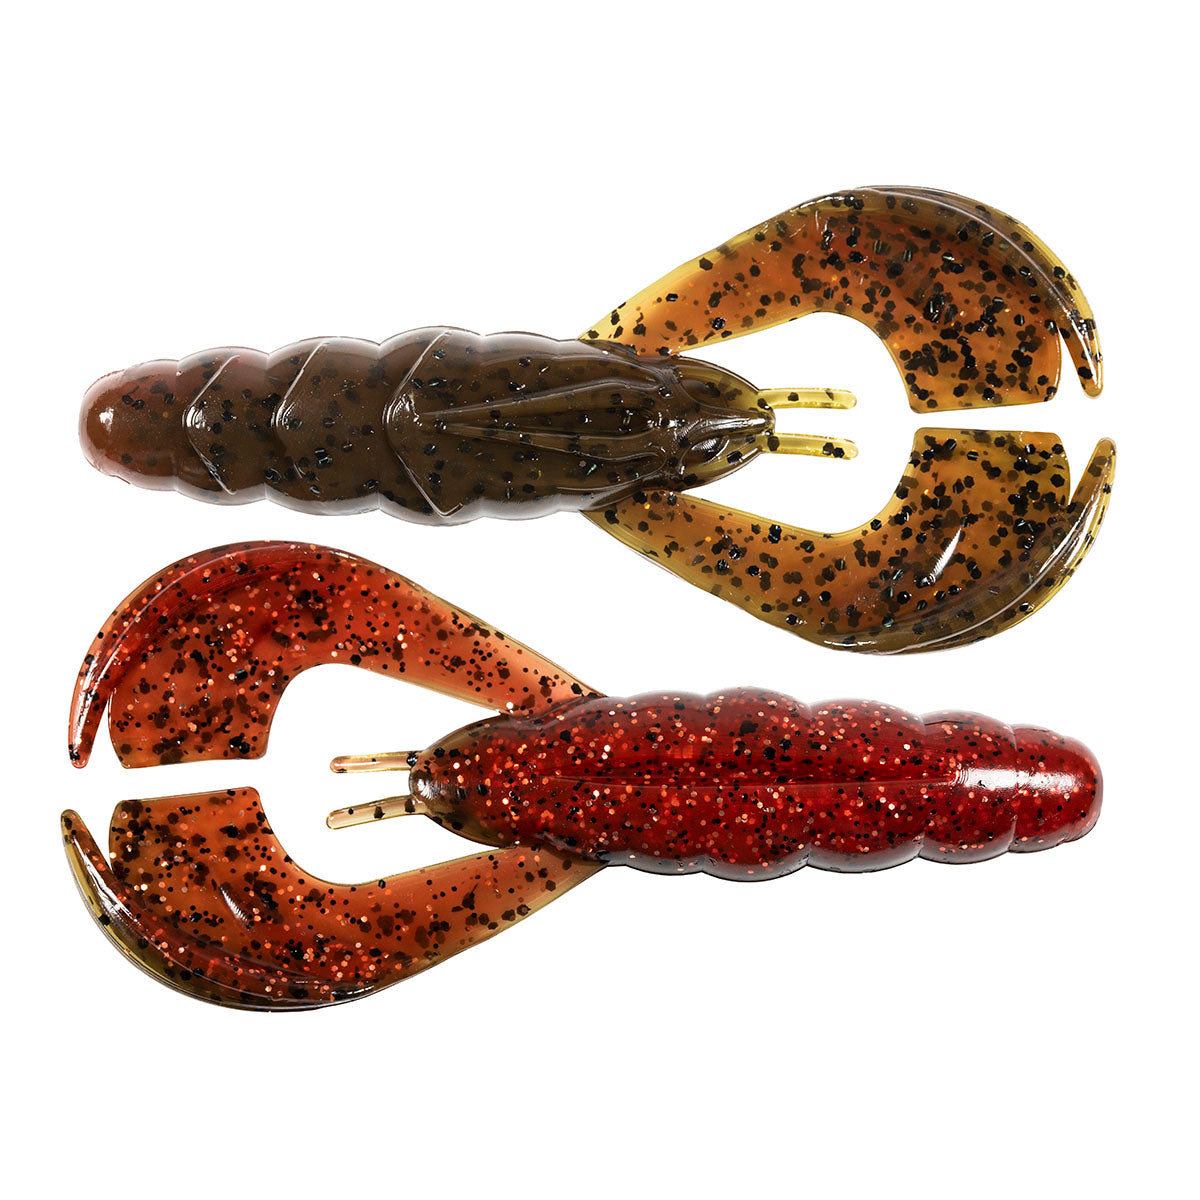 Buy Soft Plastic Worms Online, Bass Fishing Accessories, Soft Plastics, Page 6